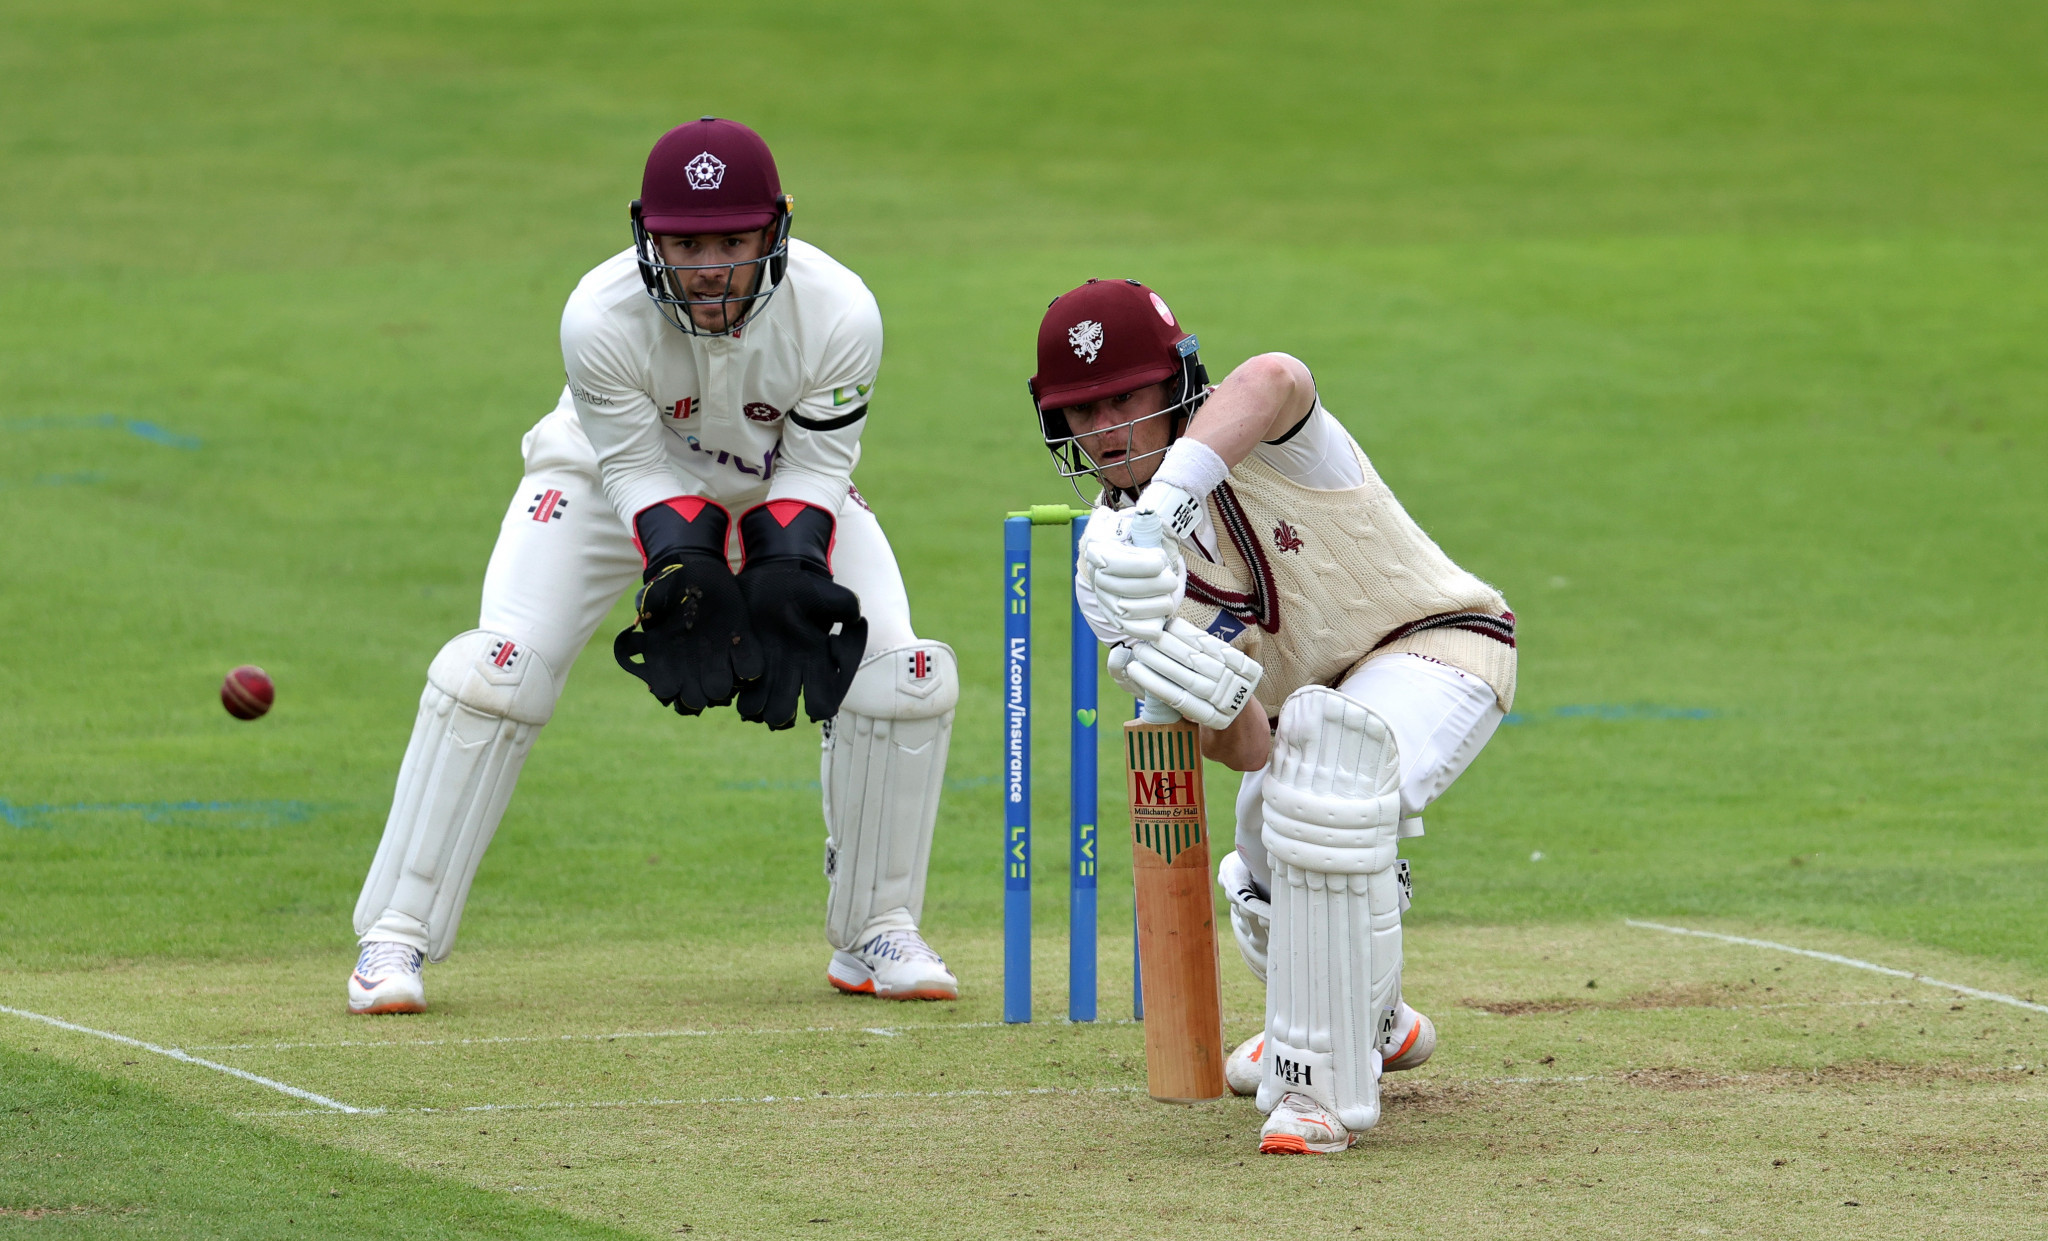 Somerset skipper Tom Abell, right, is to feature for Welsh Fire Men in the third season of The Hundred ©Getty Images 